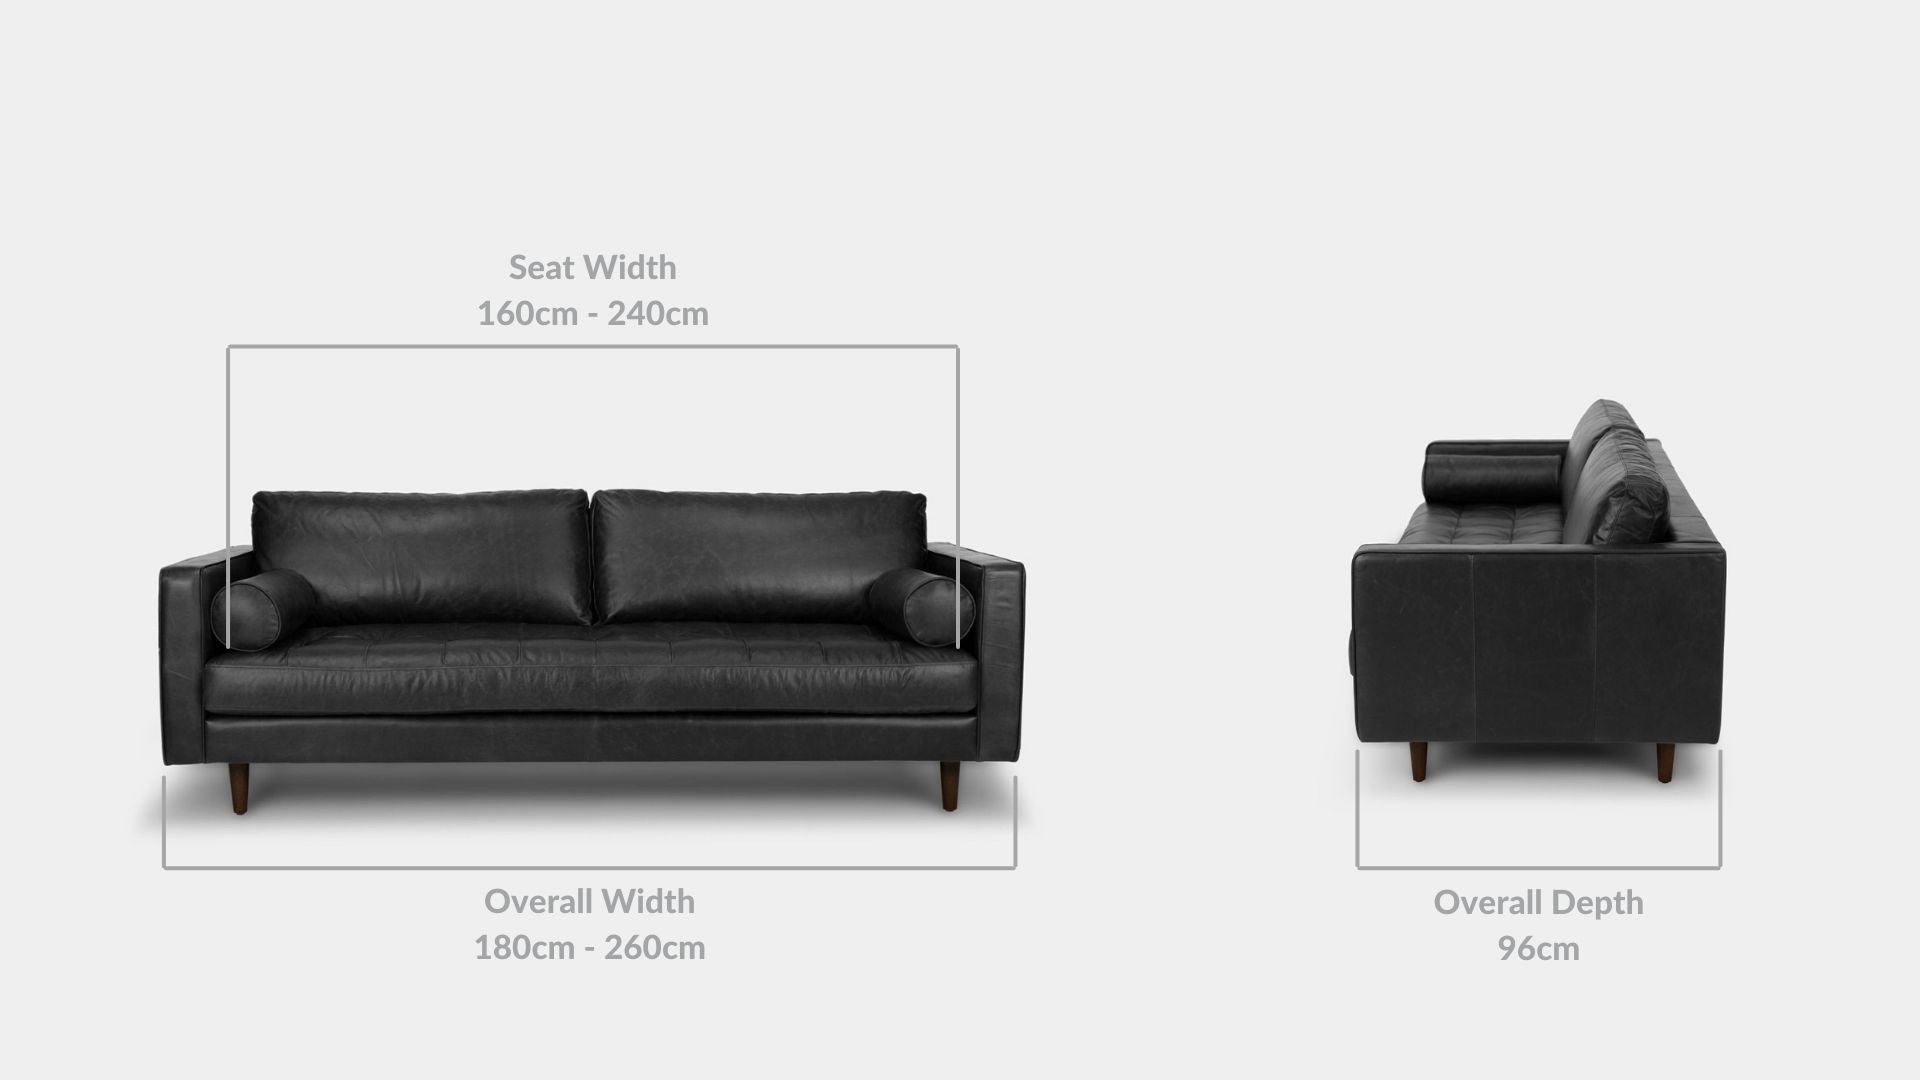 Details the key dimensions in terms of overall width, overall depth and seat width for Castle Full Leather Sofa